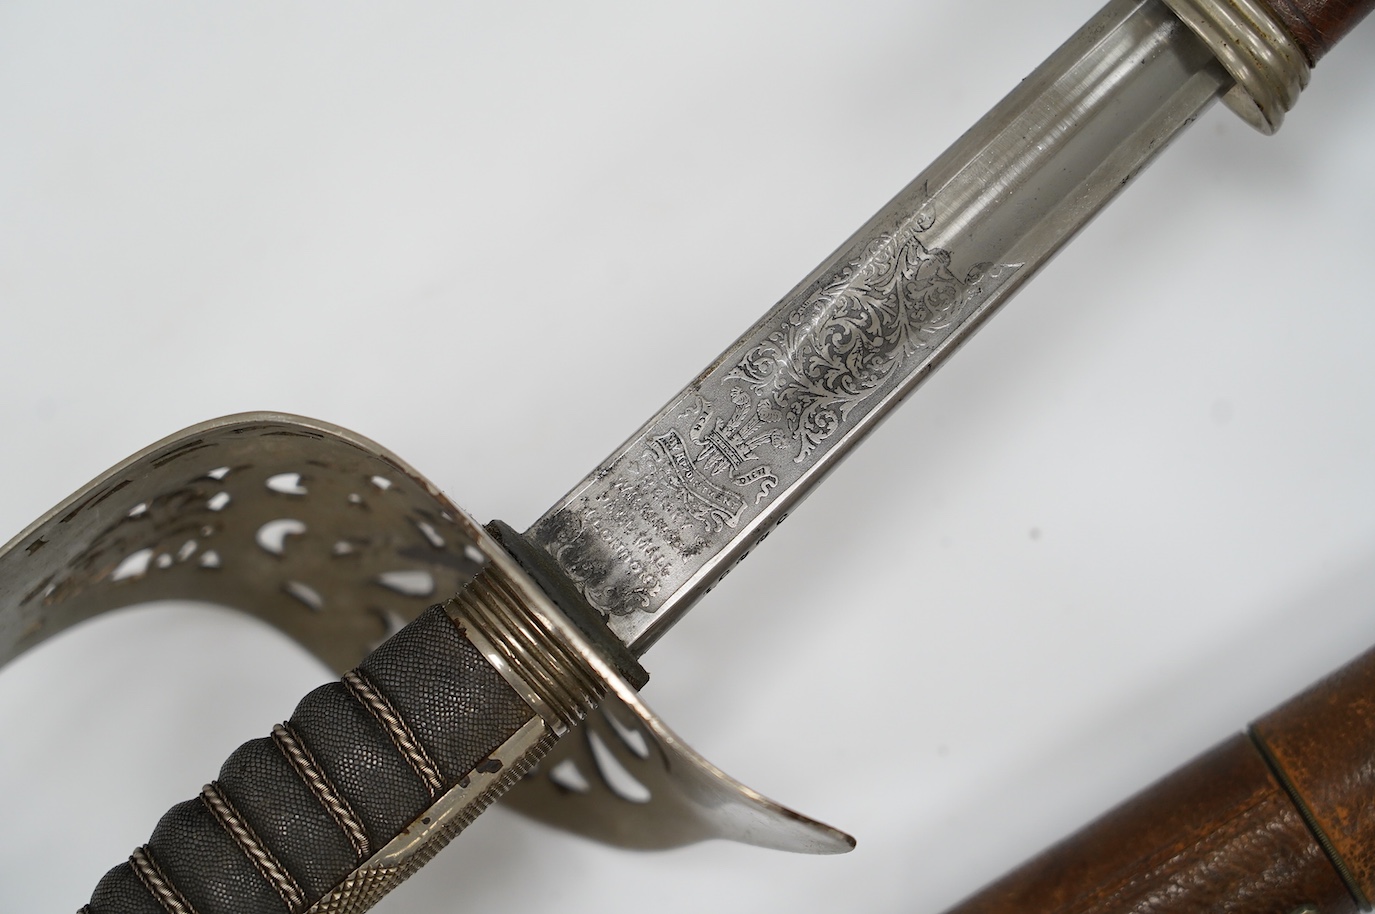 An 1895 pattern infantry officer’s sword by Wilkinson, proof number 34431, blade 82cm, in it’s leather field service scabbard with hangers and sword knot, with supporting research confirming that it was purchased by the